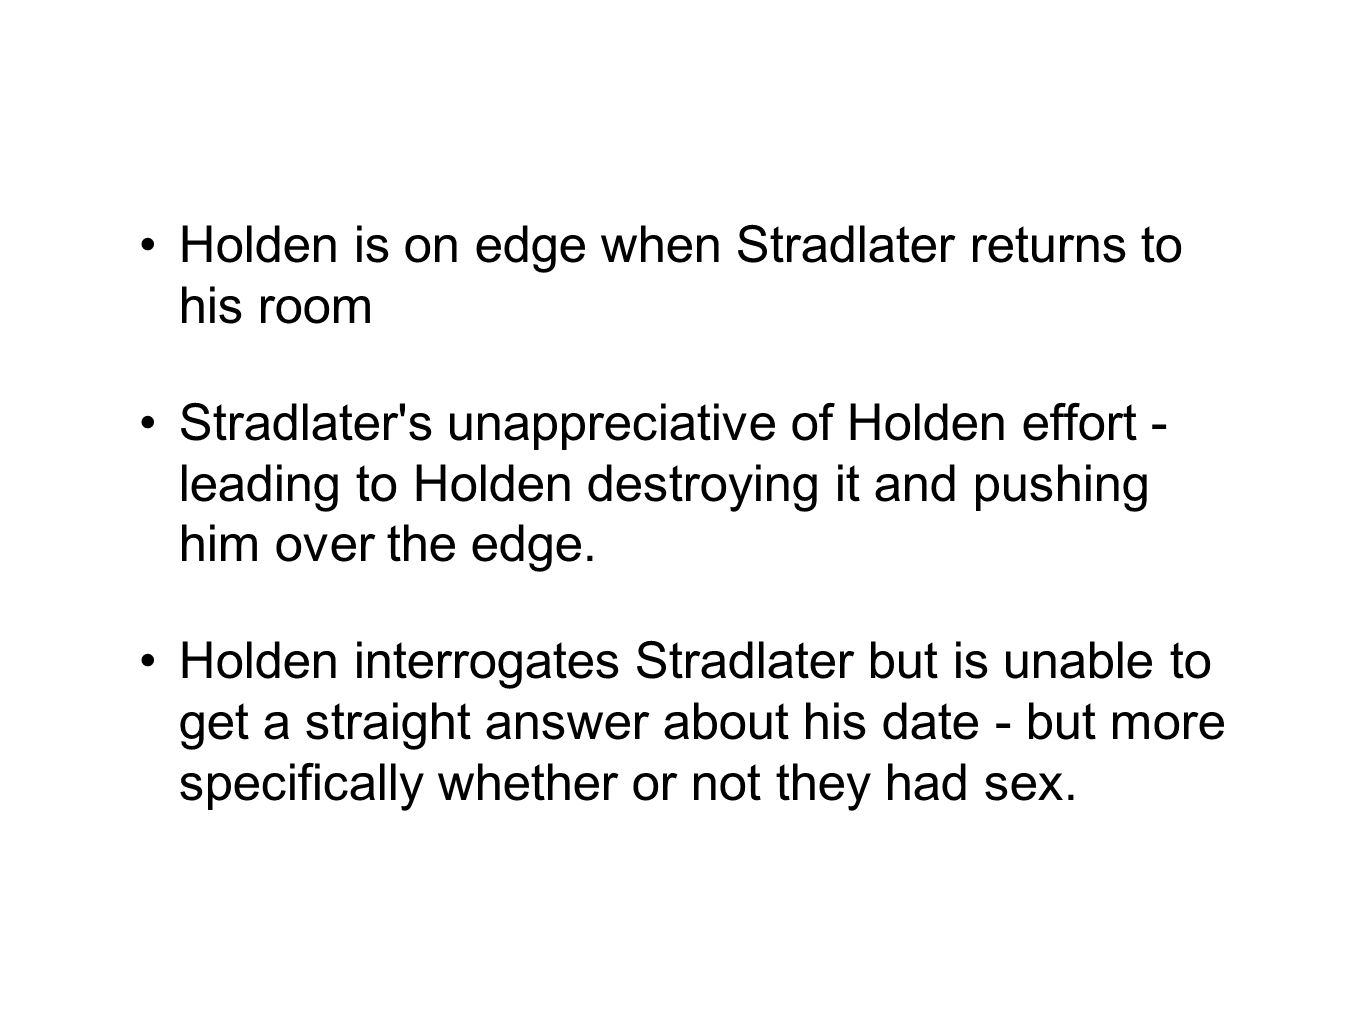 who is stradlater